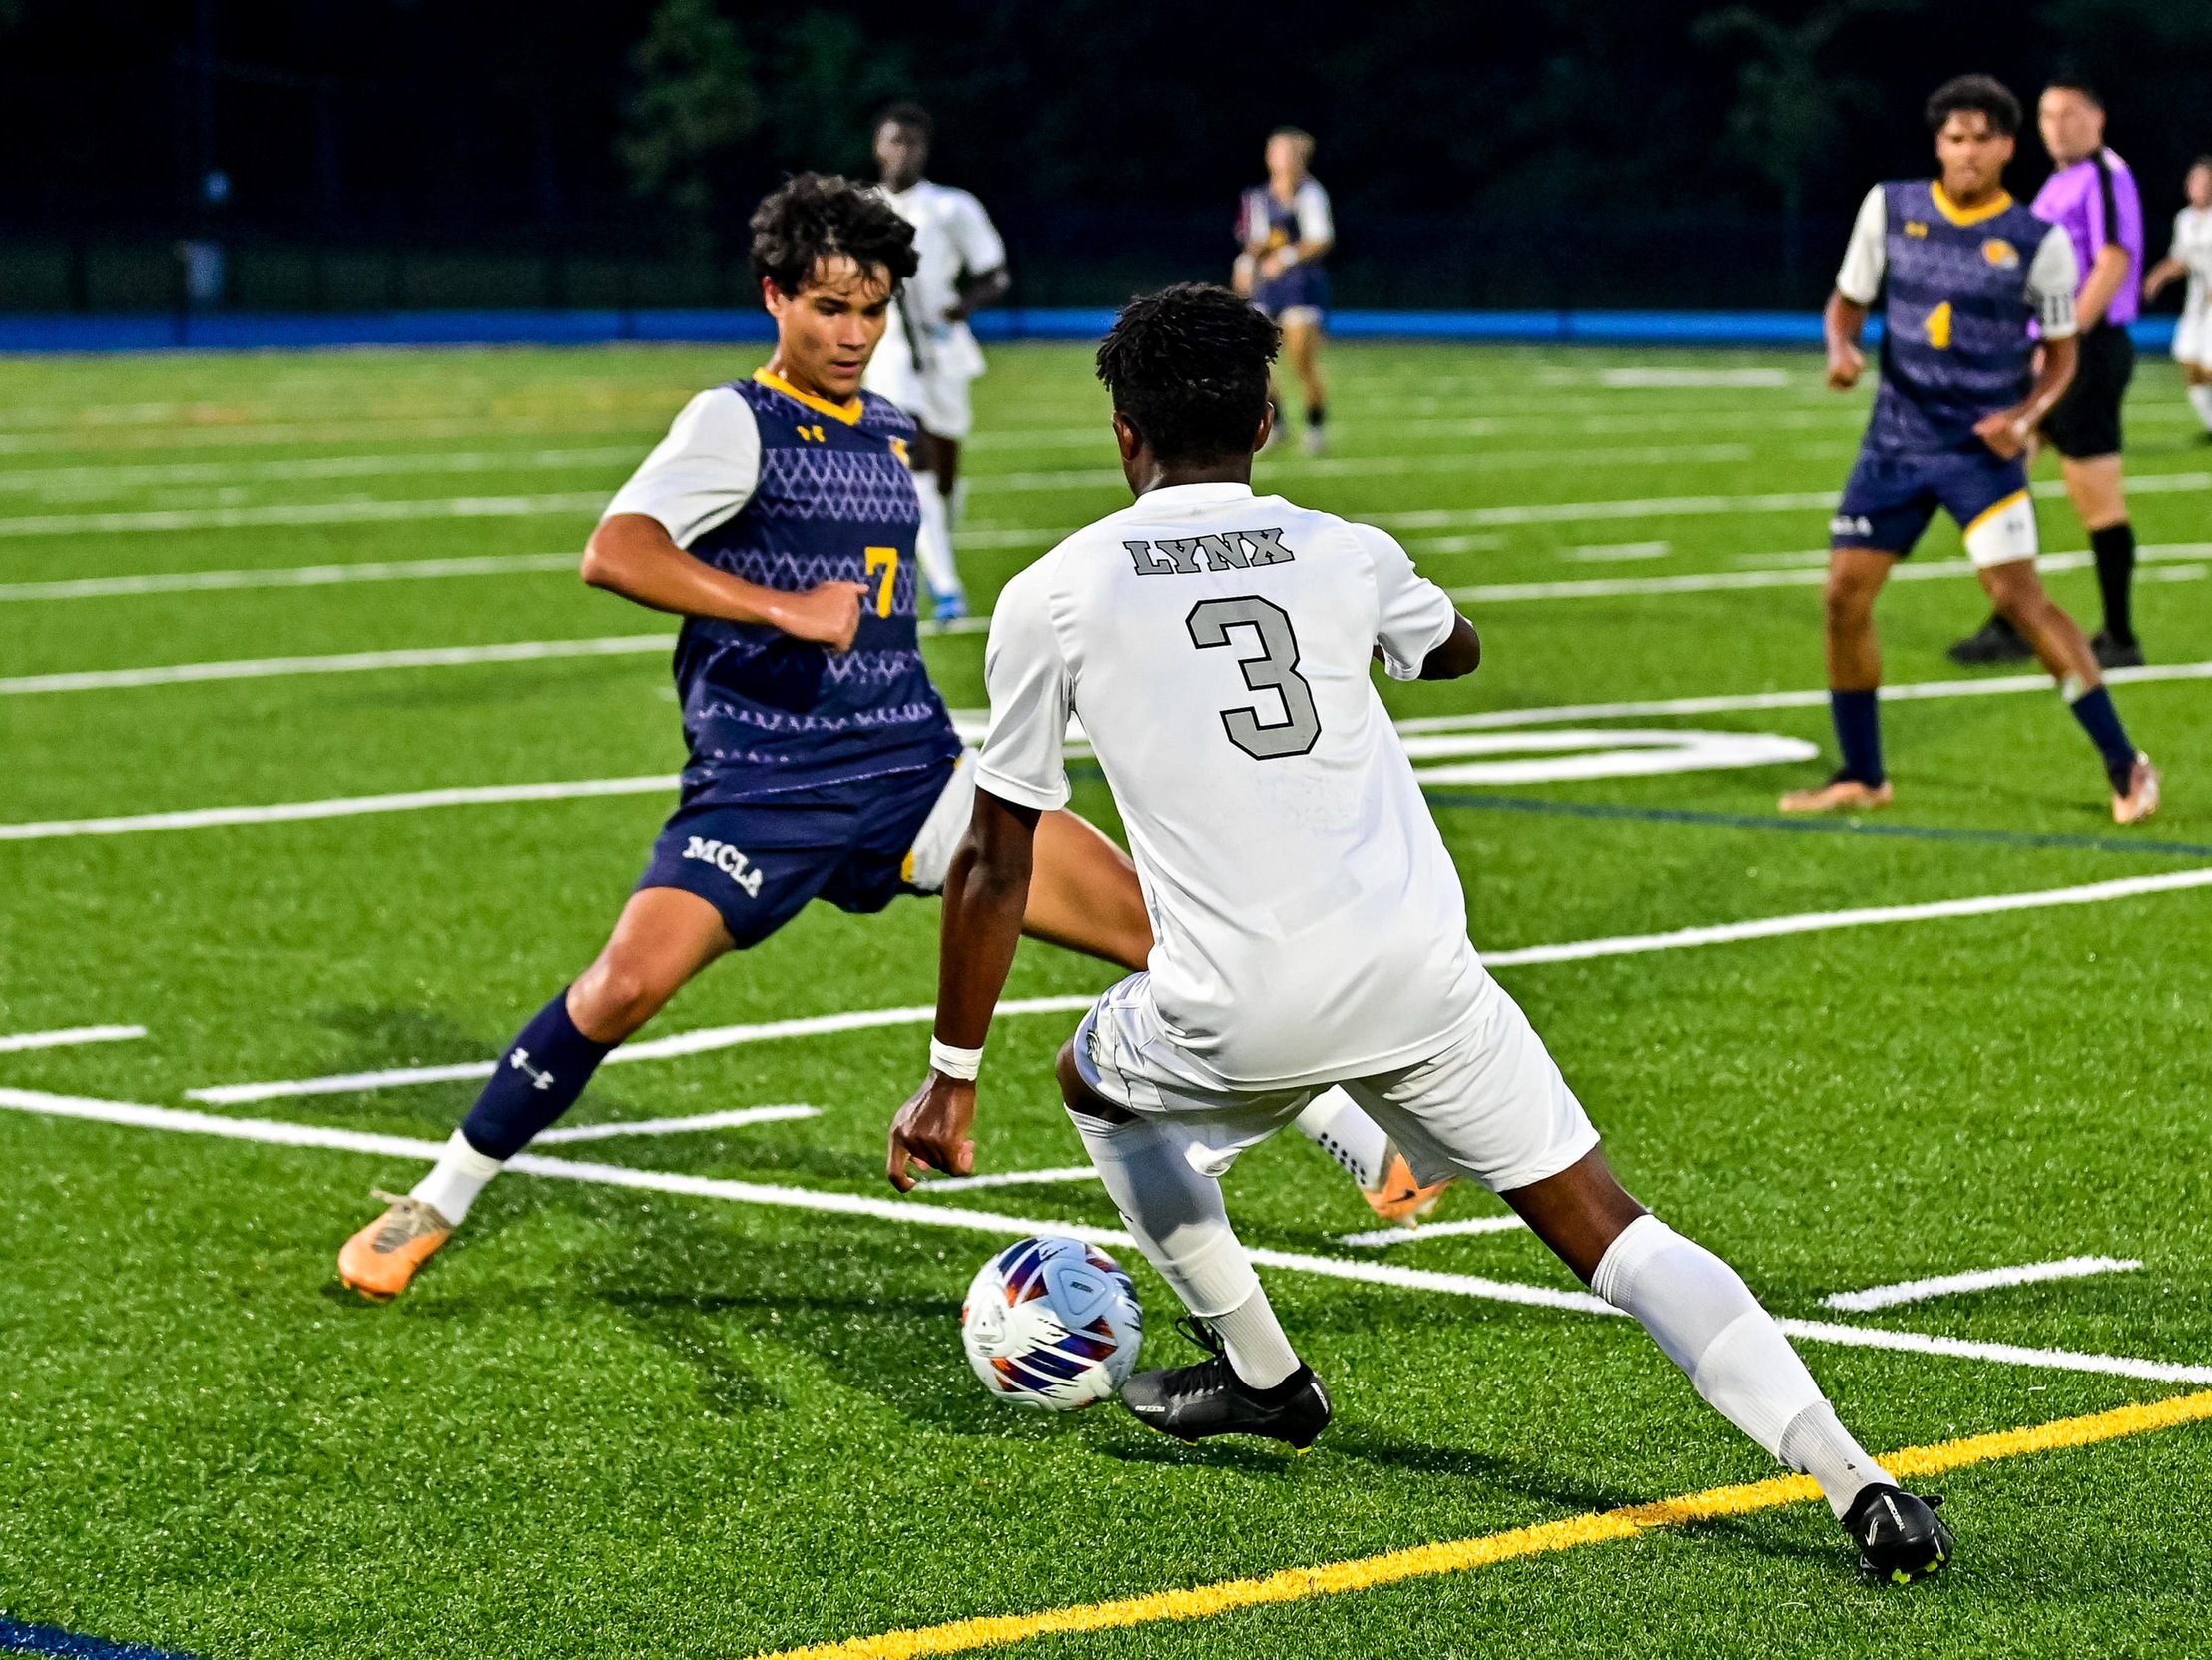 Men's Soccer Falls to Thomas in Tight 3-2 Game